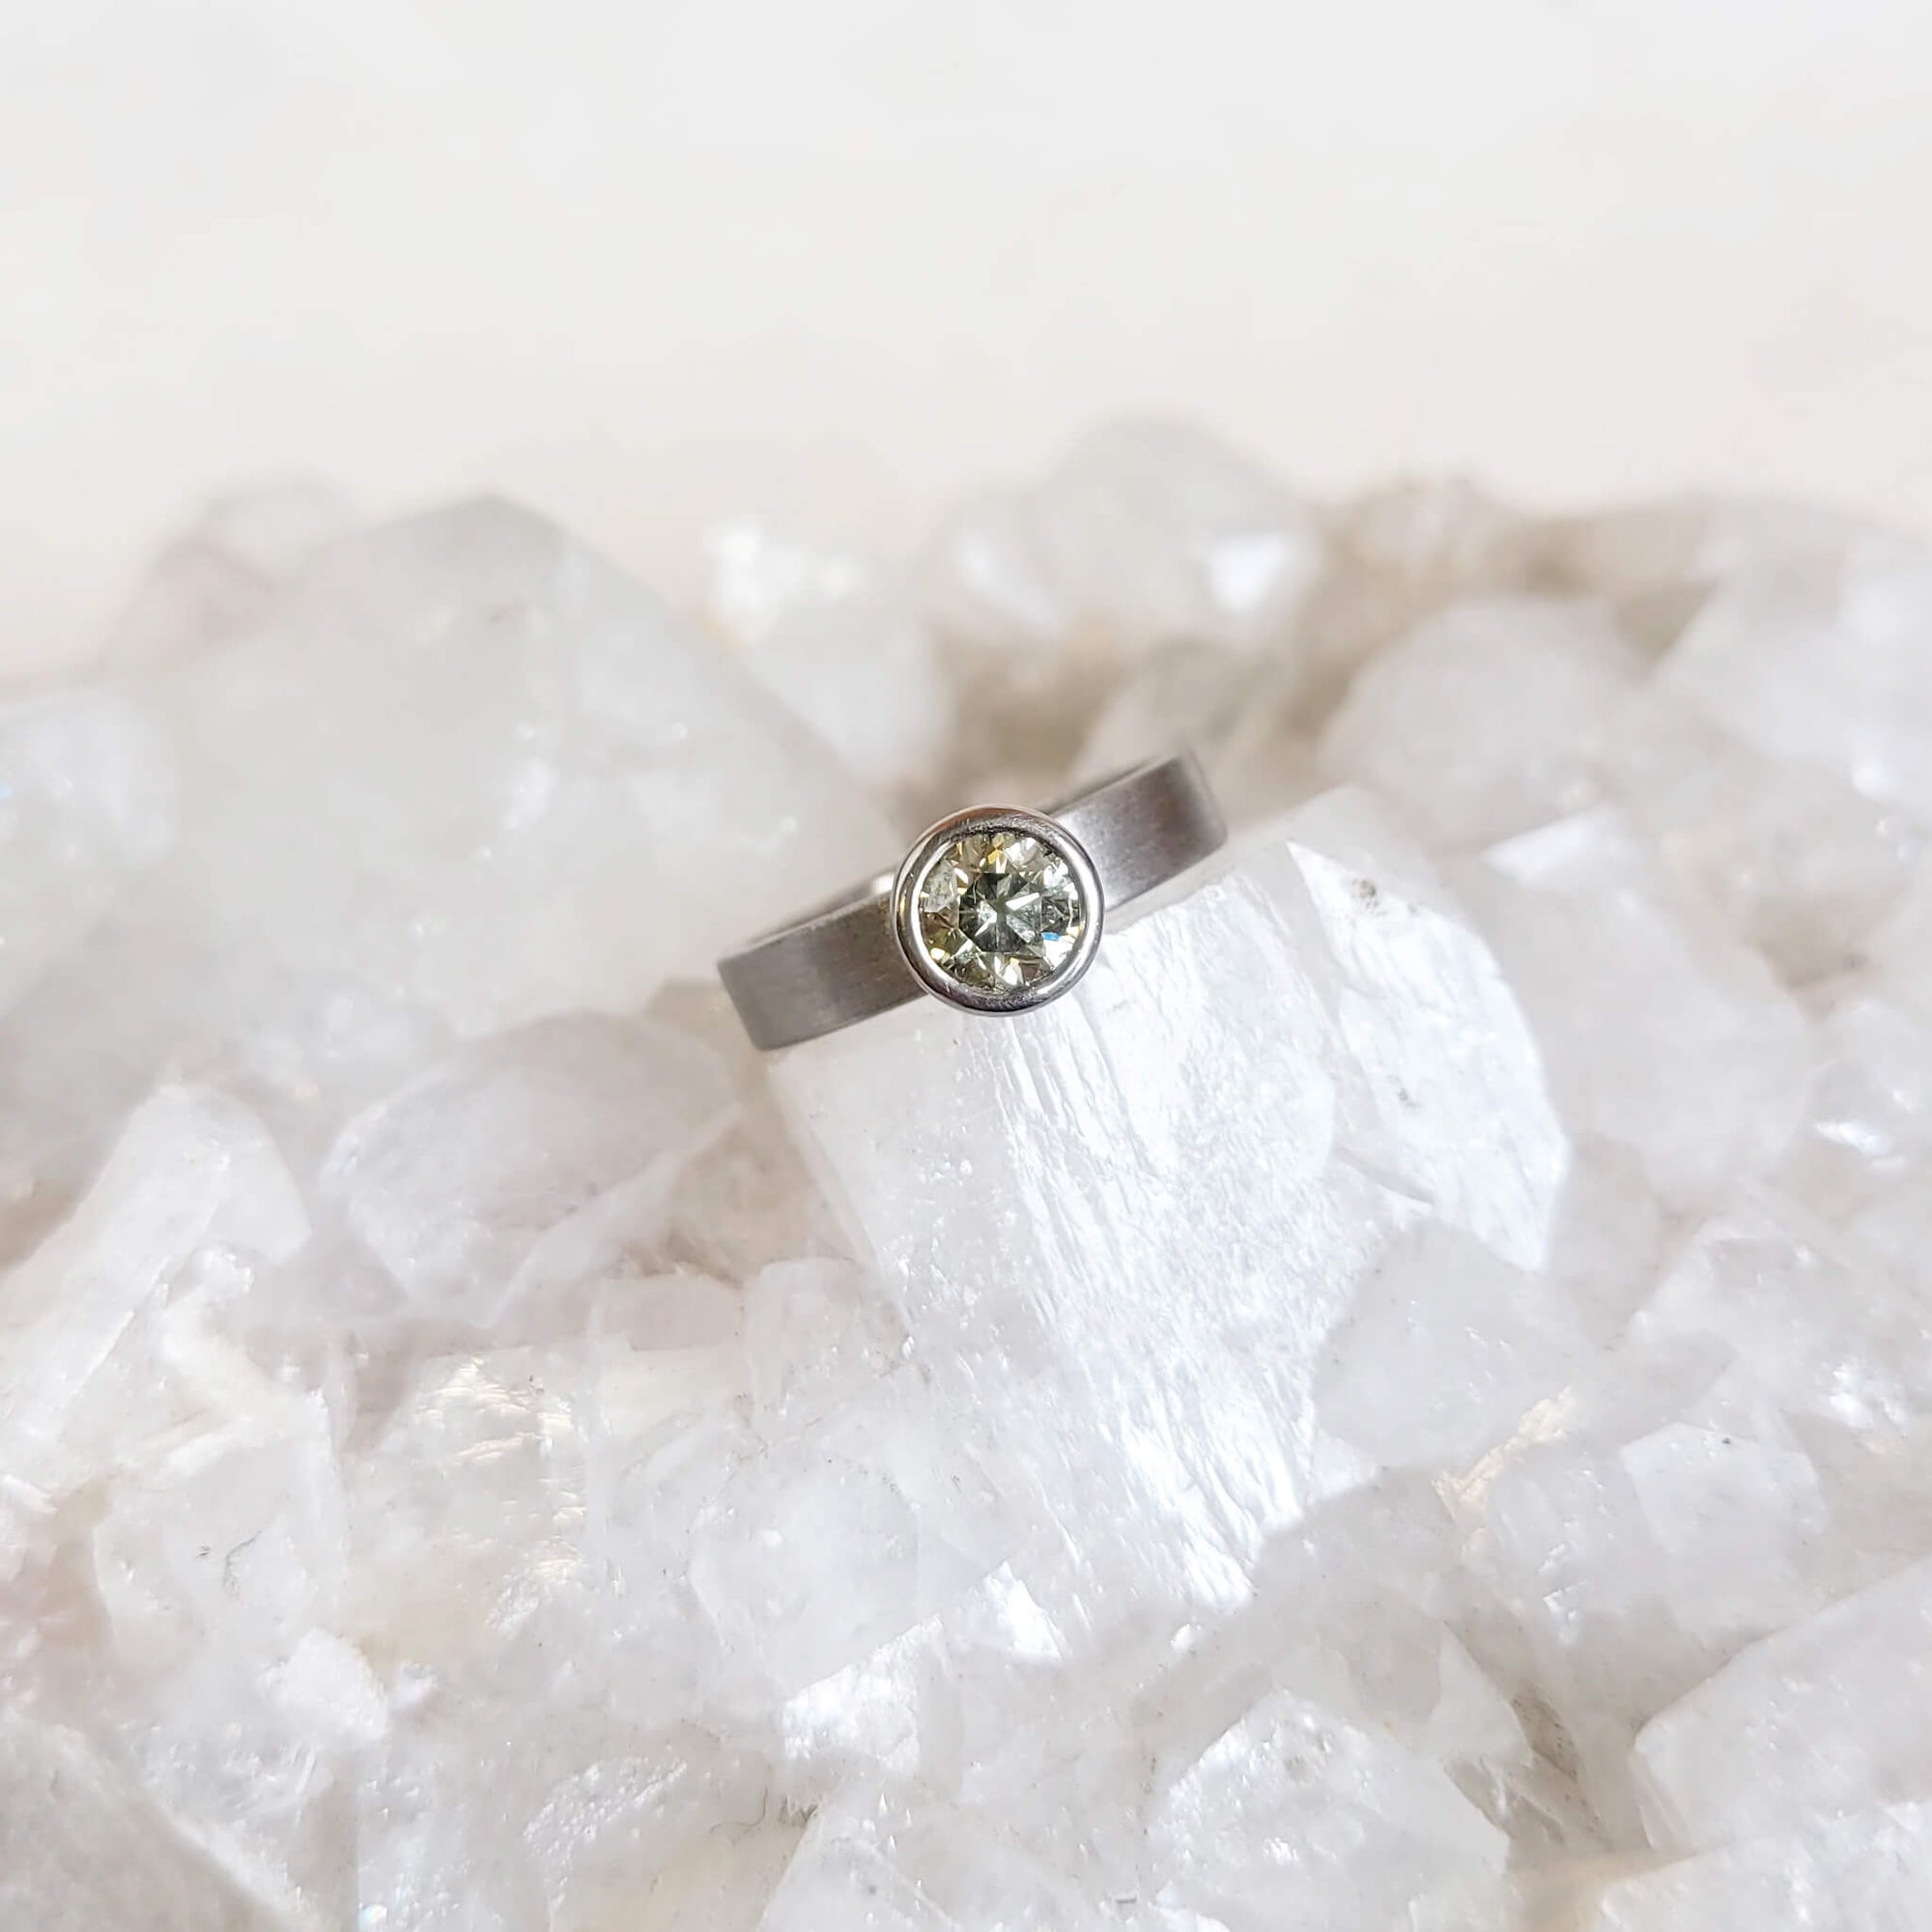 Modern engagement ring. Natural green brilliant cut diamond in palladium. Handmade by EC Design Studio in Minneapolis, MN using recycled metal and conflict-free stone.